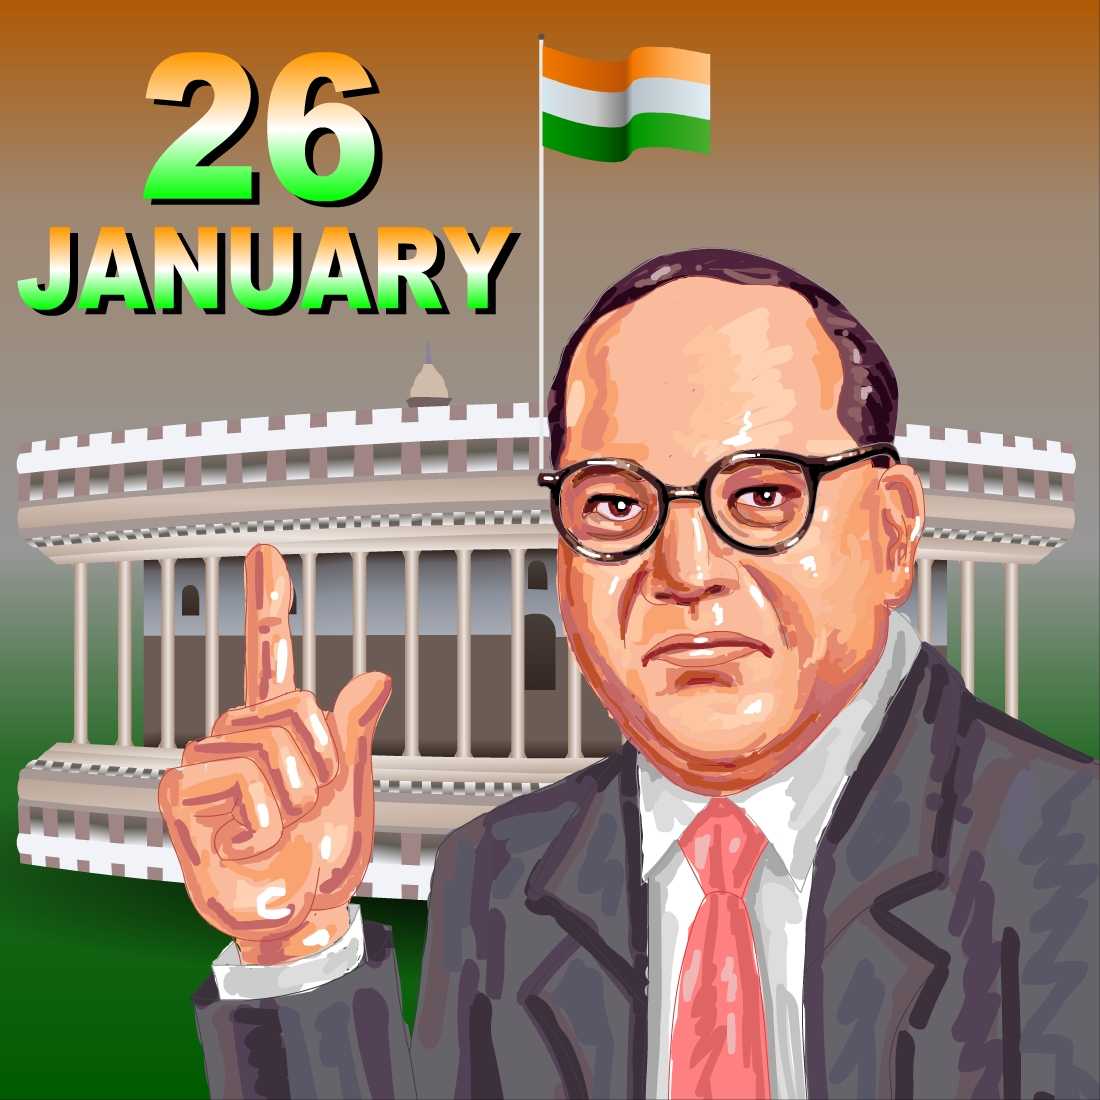 Cartoon image for republic day of India